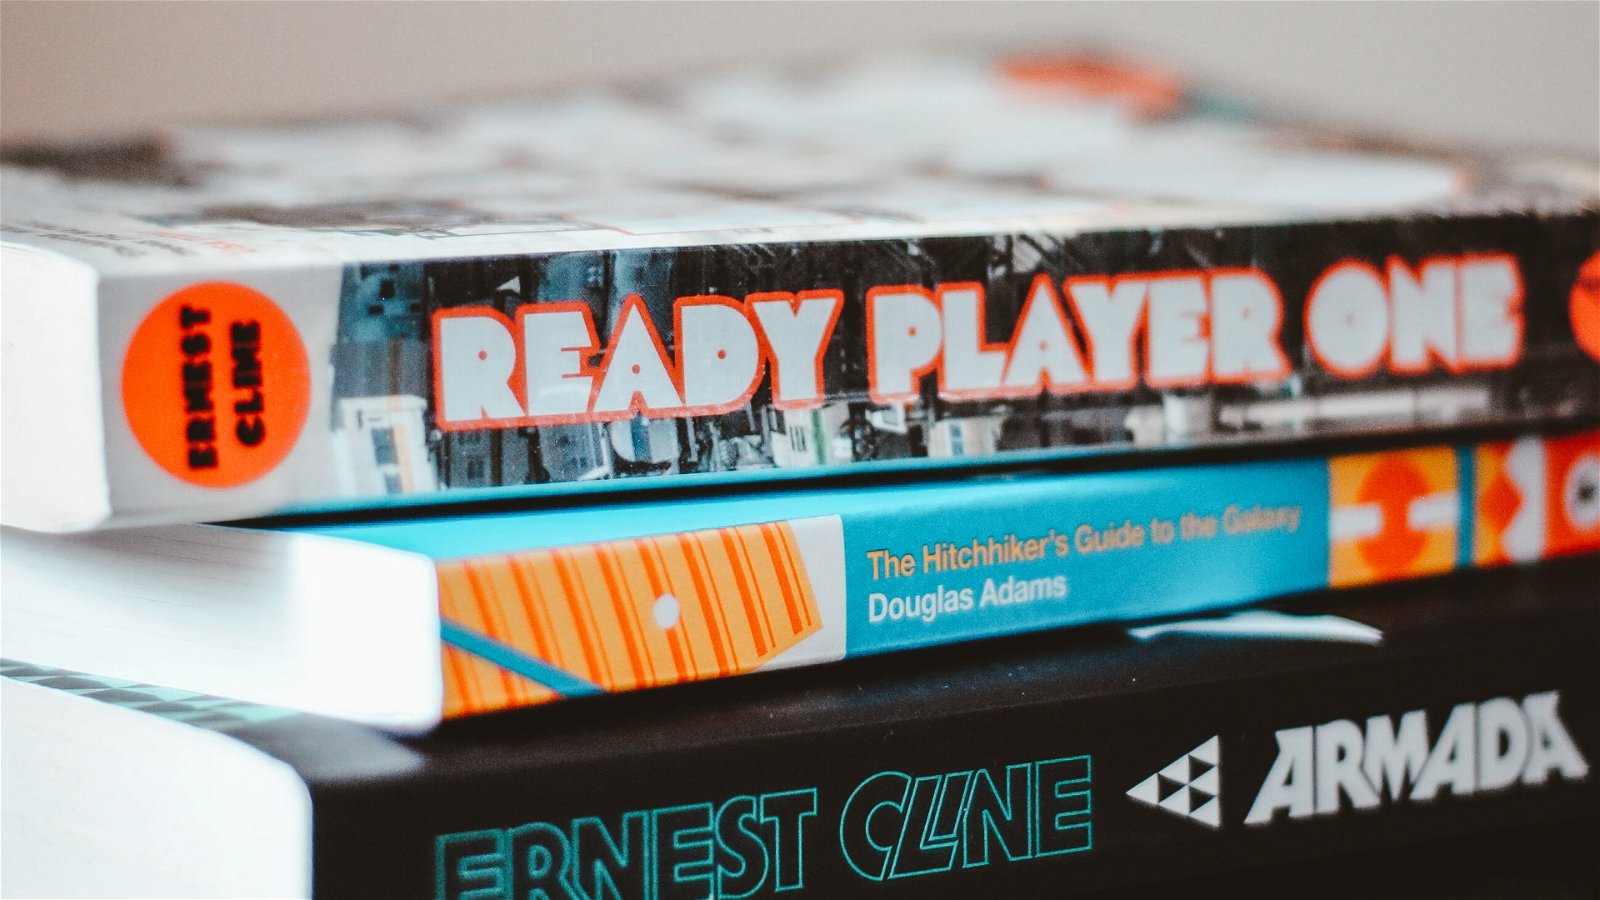 Goodreads Is Giving Fans A Chance To Win A Copy of Ernest Cline's New Book Ready Player Two